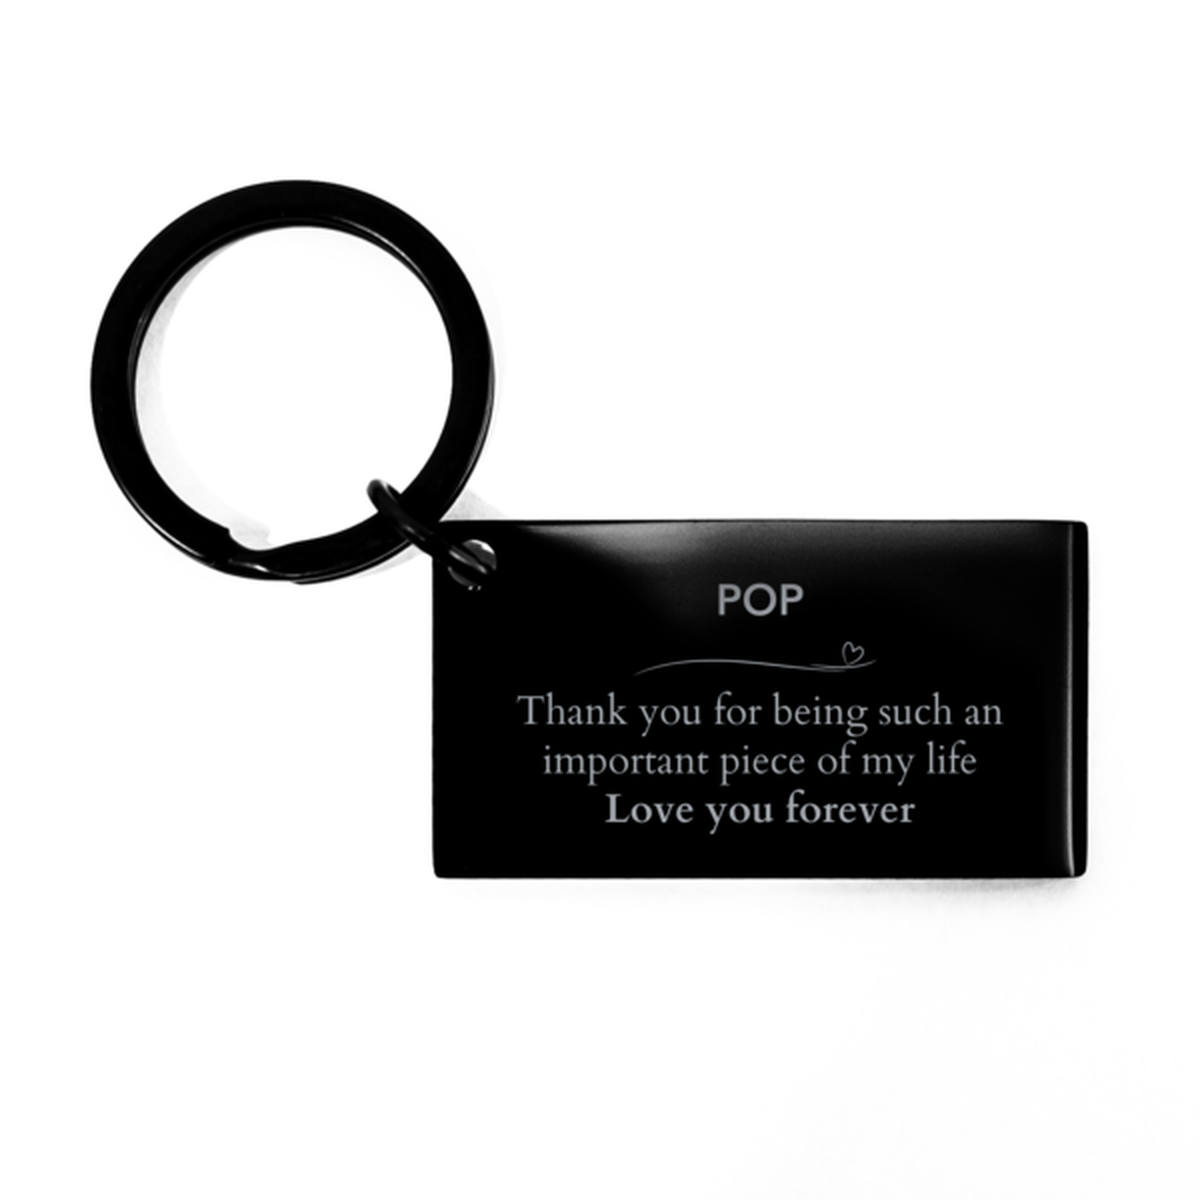 Appropriate Pop Keychain Epic Birthday Gifts for Pop Thank you for being such an important piece of my life Pop Christmas Mothers Fathers Day